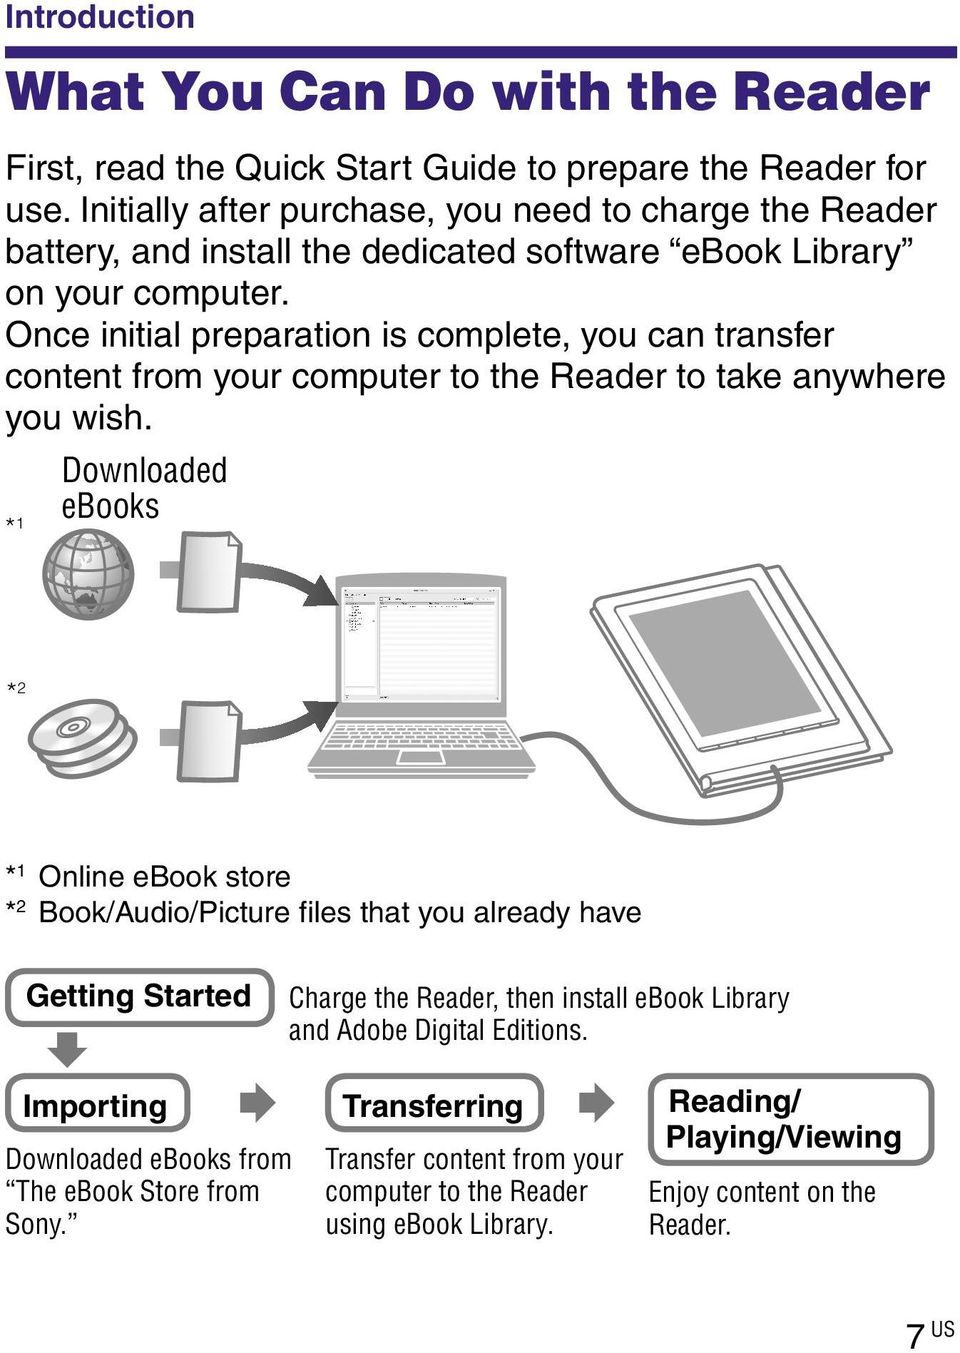 Once initial preparation is complete, you can transfer content from your computer to the Reader to take anywhere you wish.